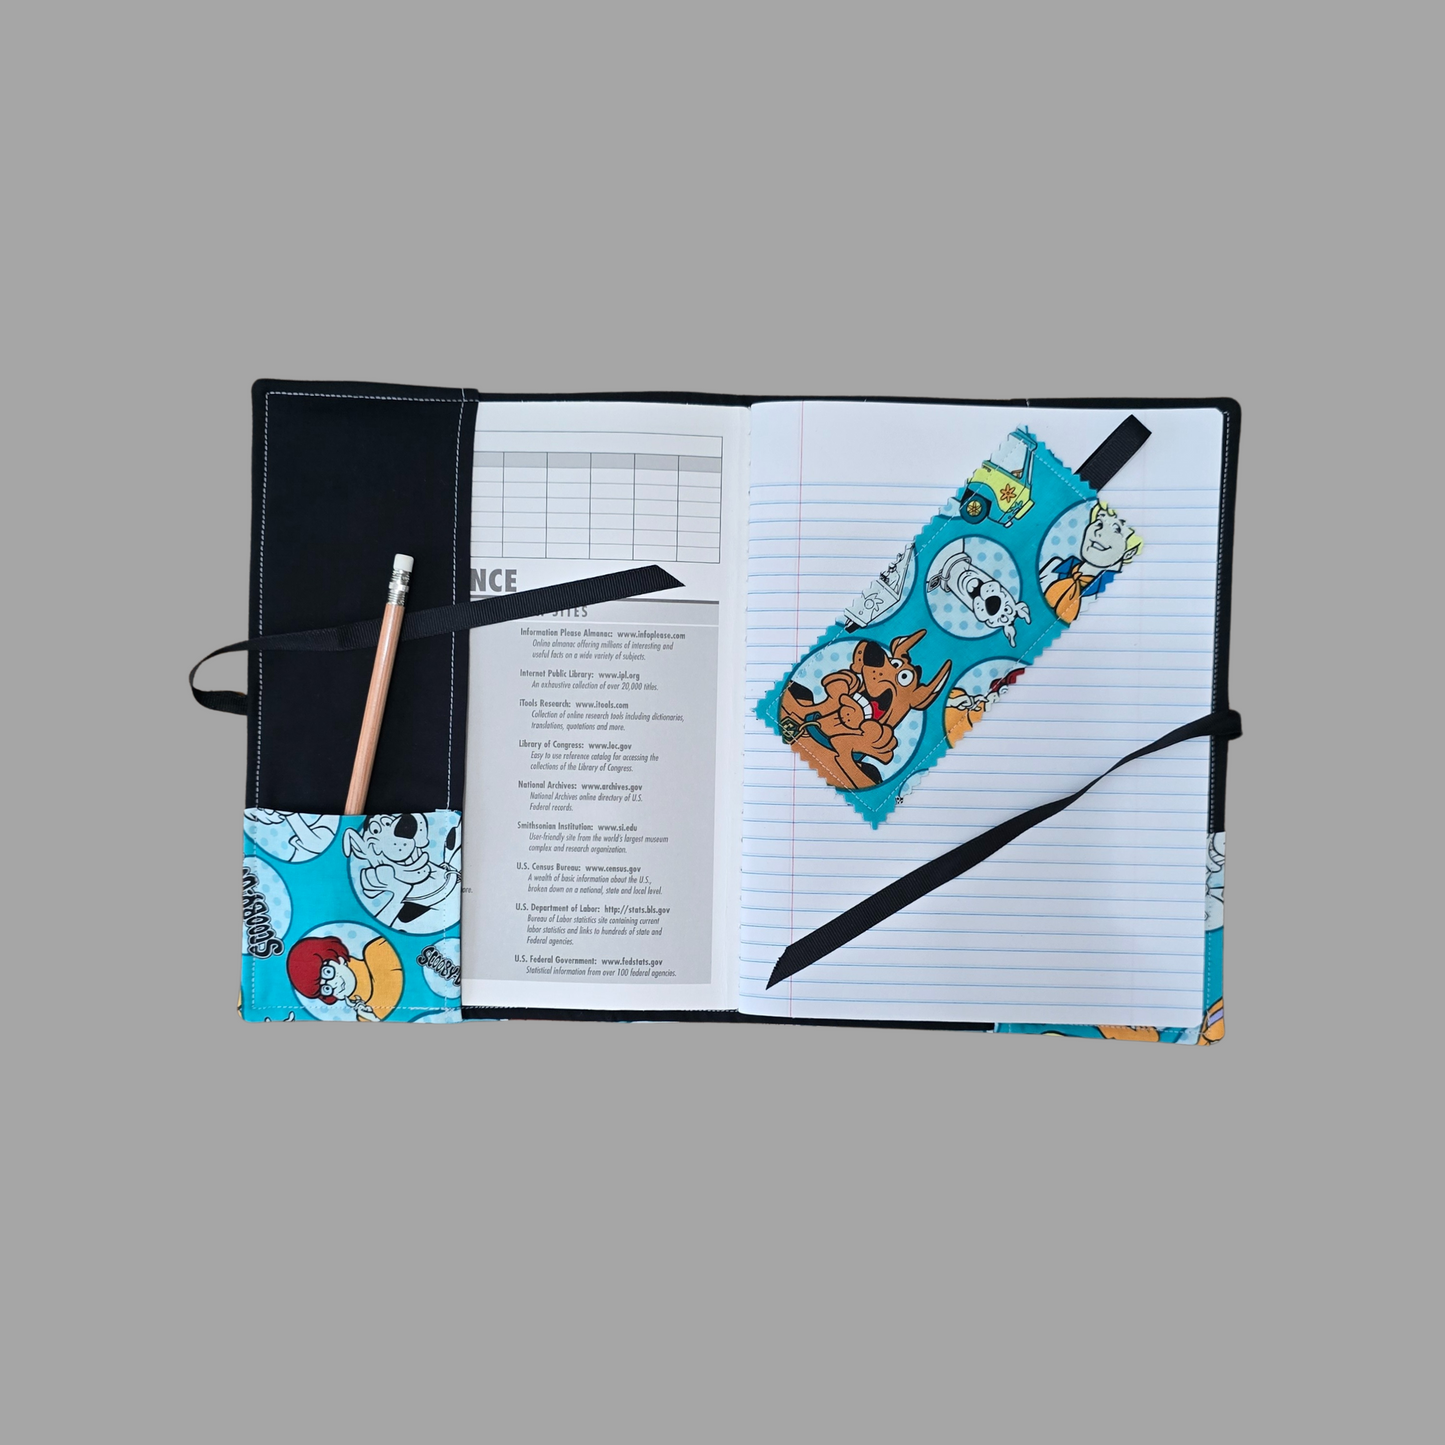 Scooby Doo & Gang Notebook Composition Book Cover, Classic Scooby School Office Journal Diary